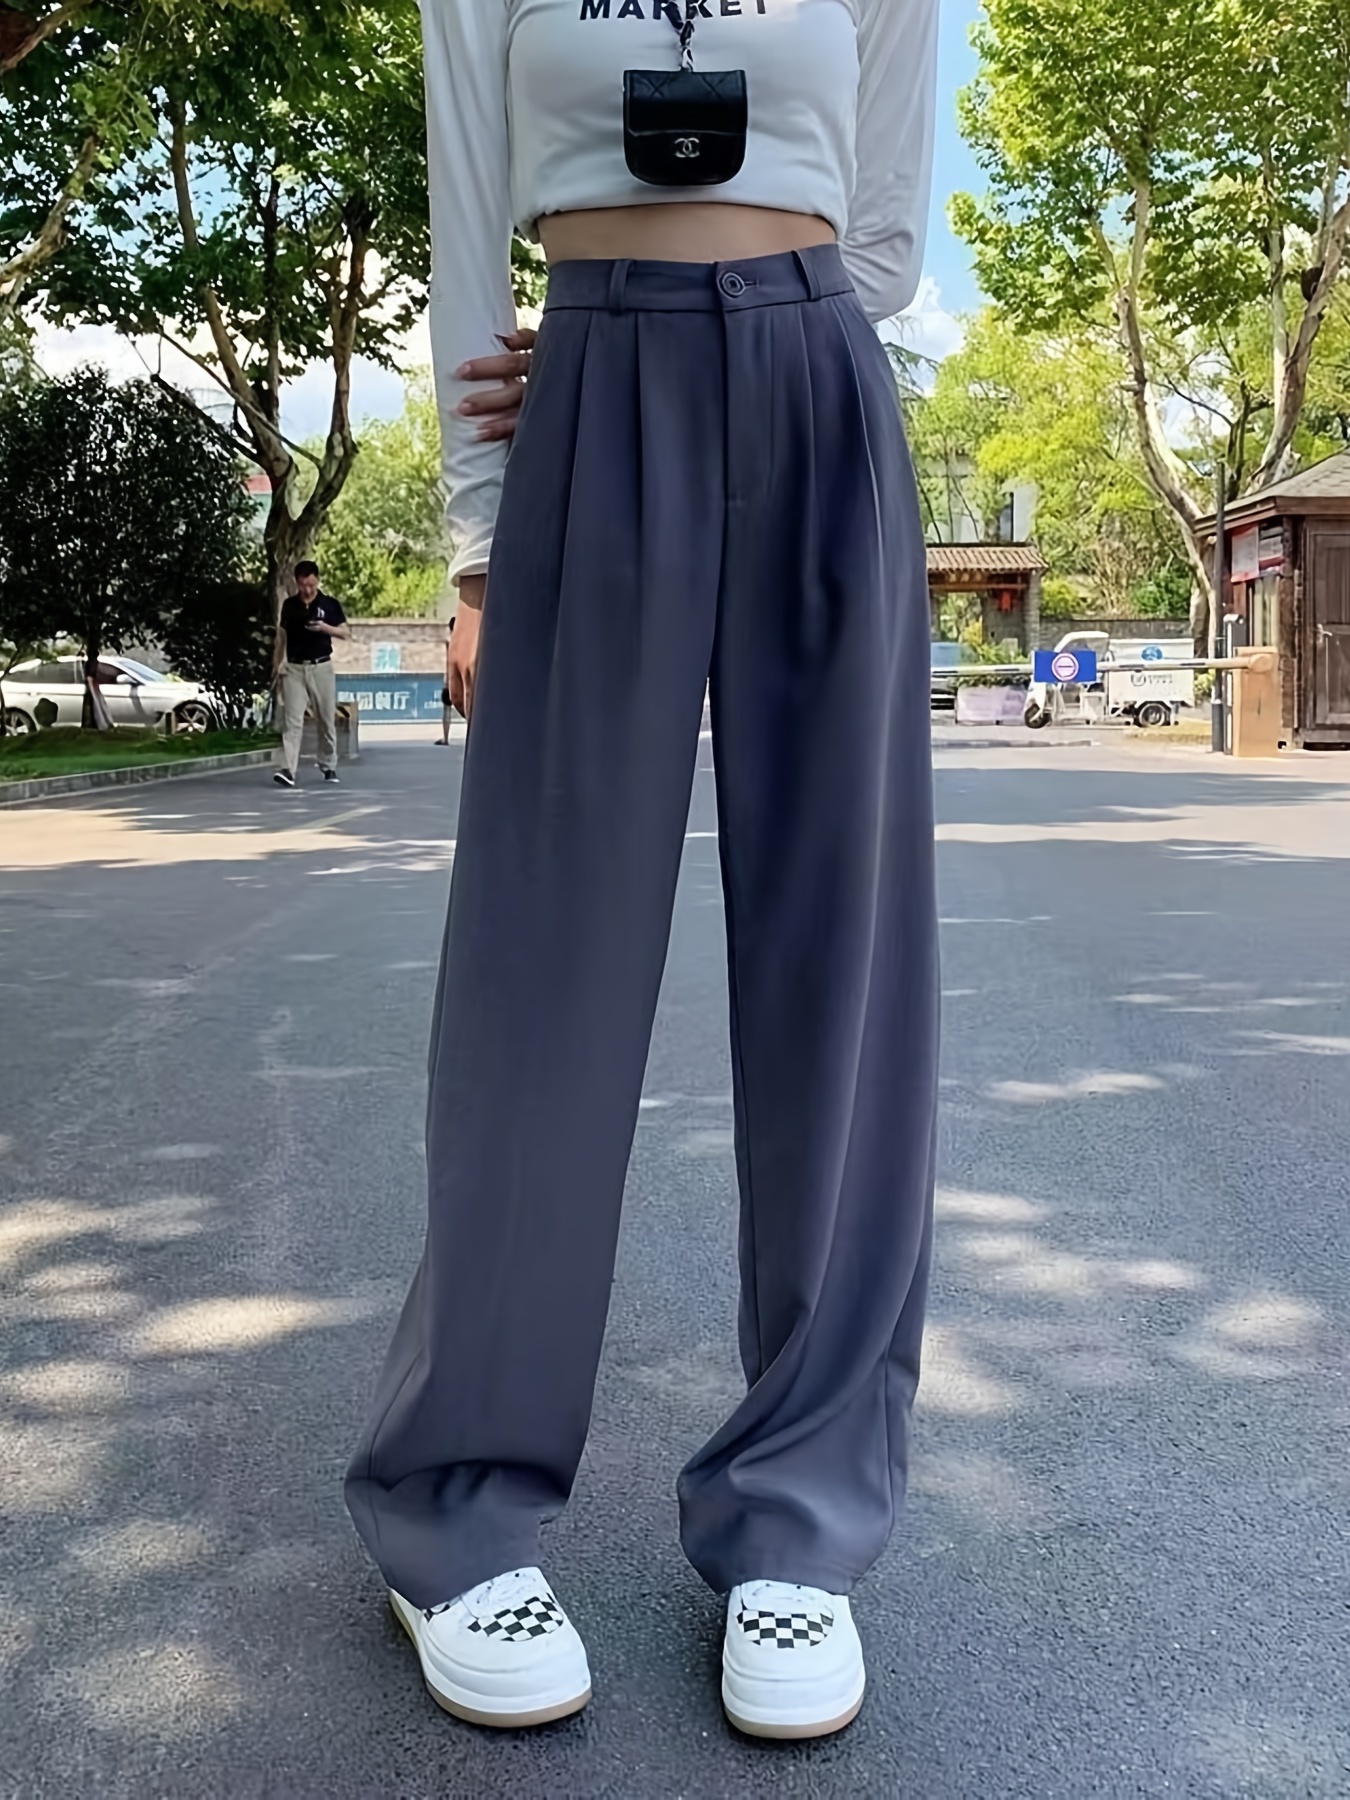 Buy New Woman's Casual Full-Length Loose Pants - Solid High Waist